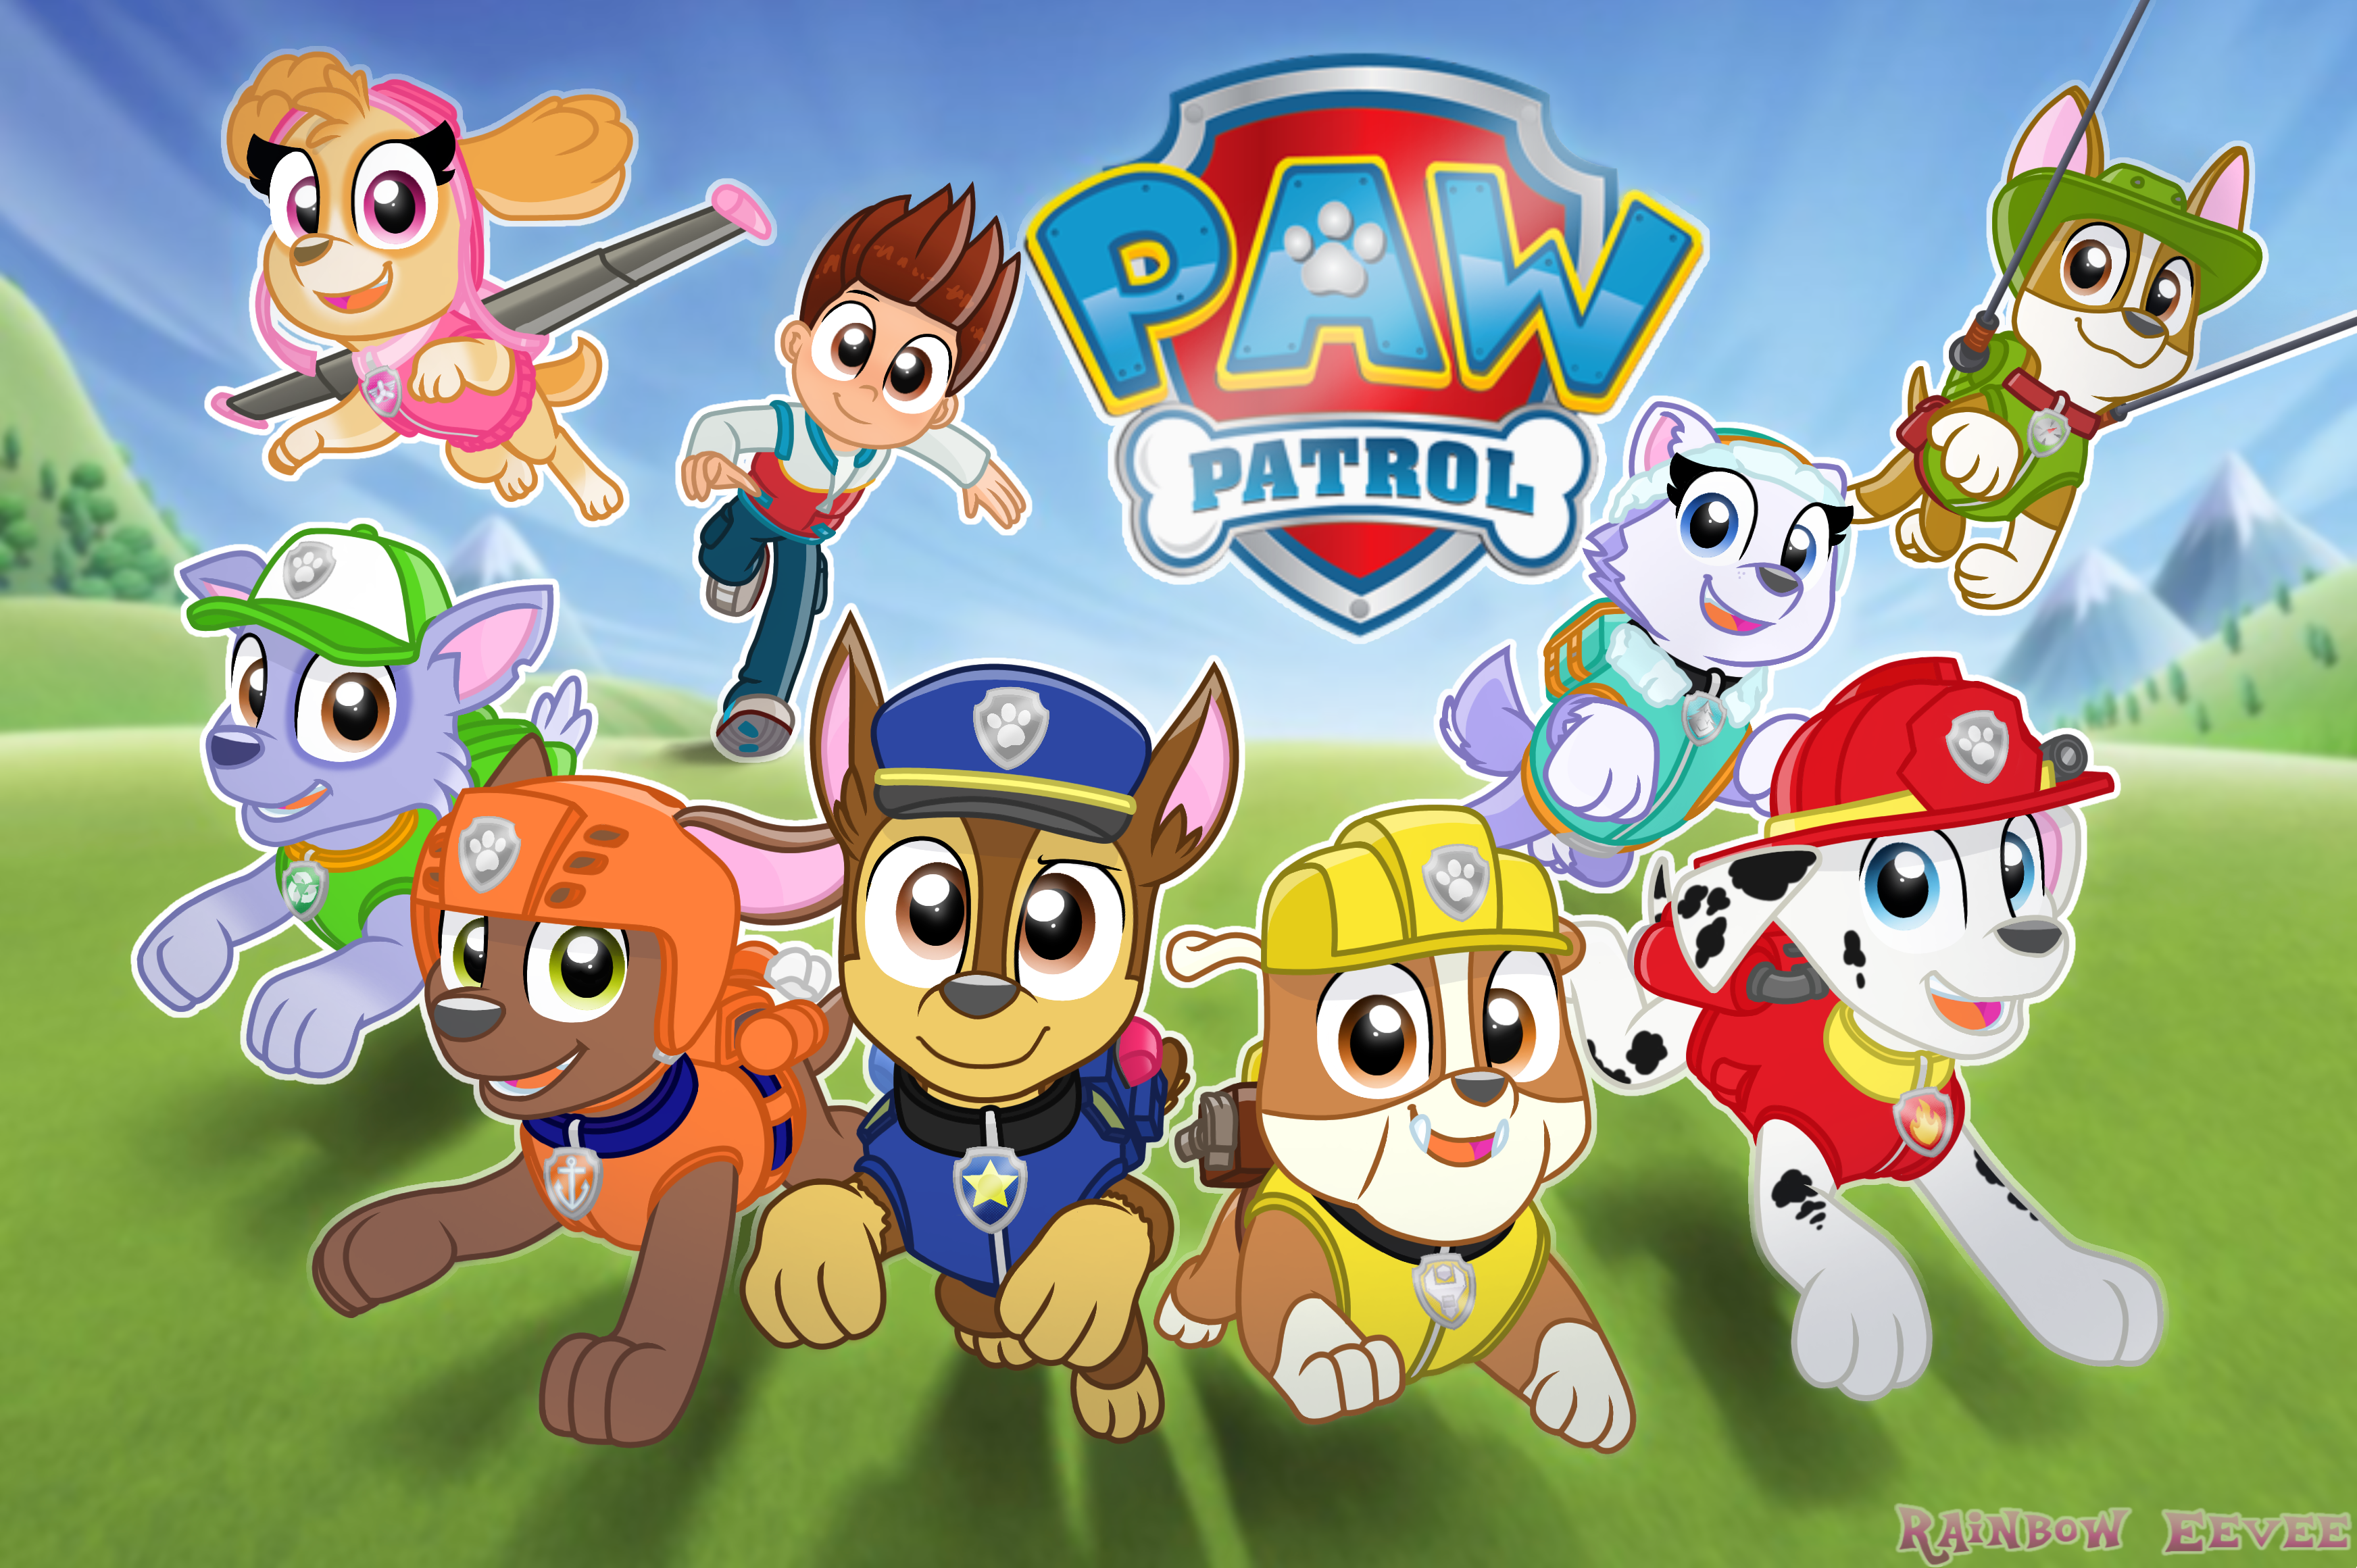 PAW Patrol in action Wallpaper